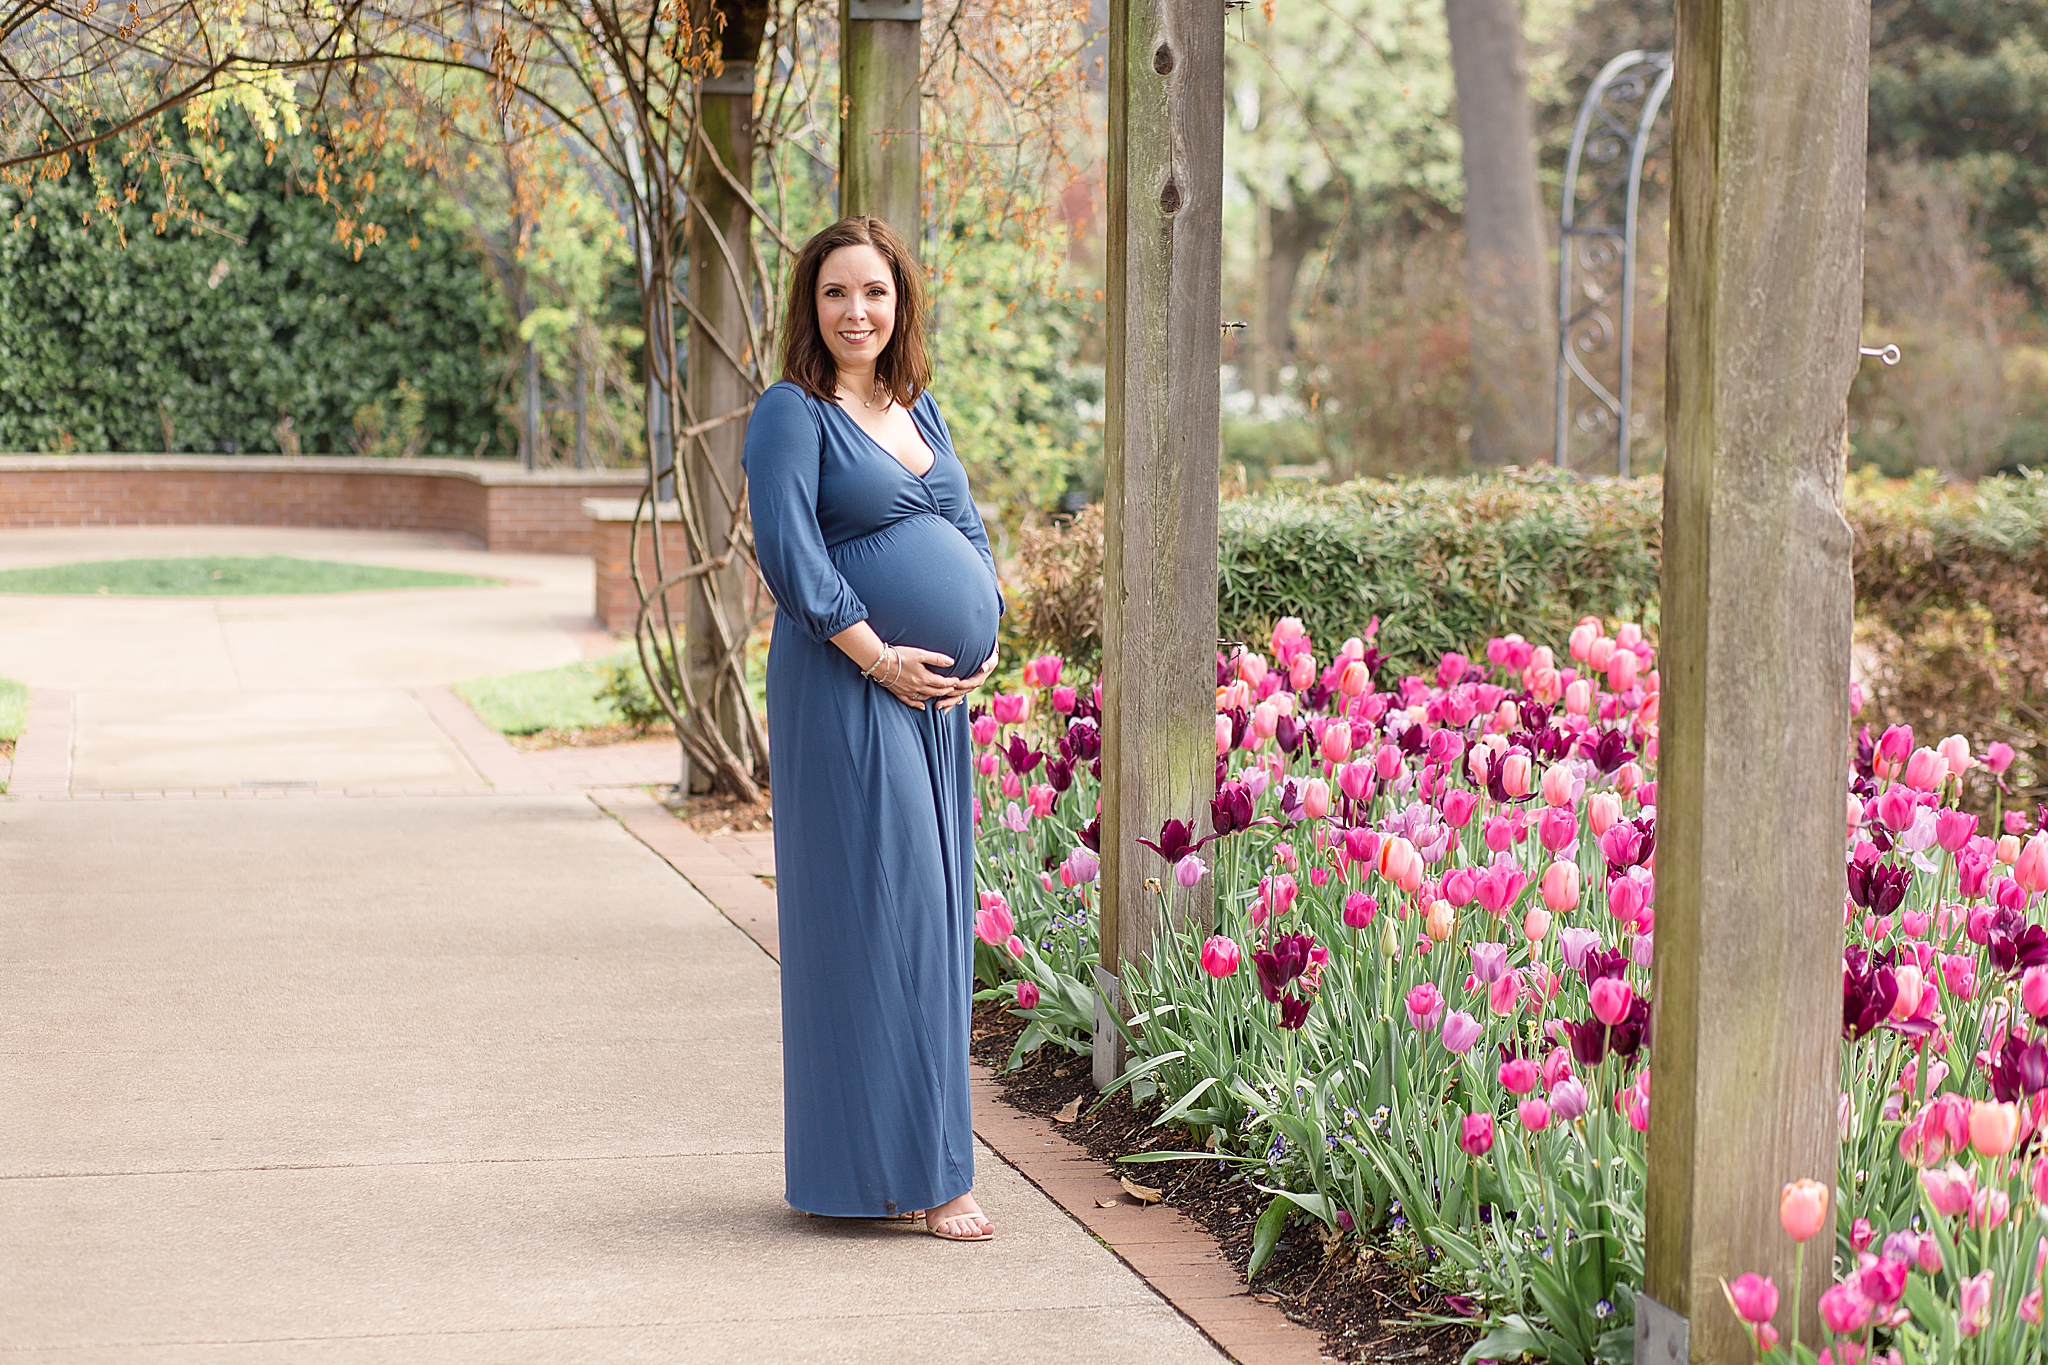 mom to be poses holding belly in blue dress for maternity photos